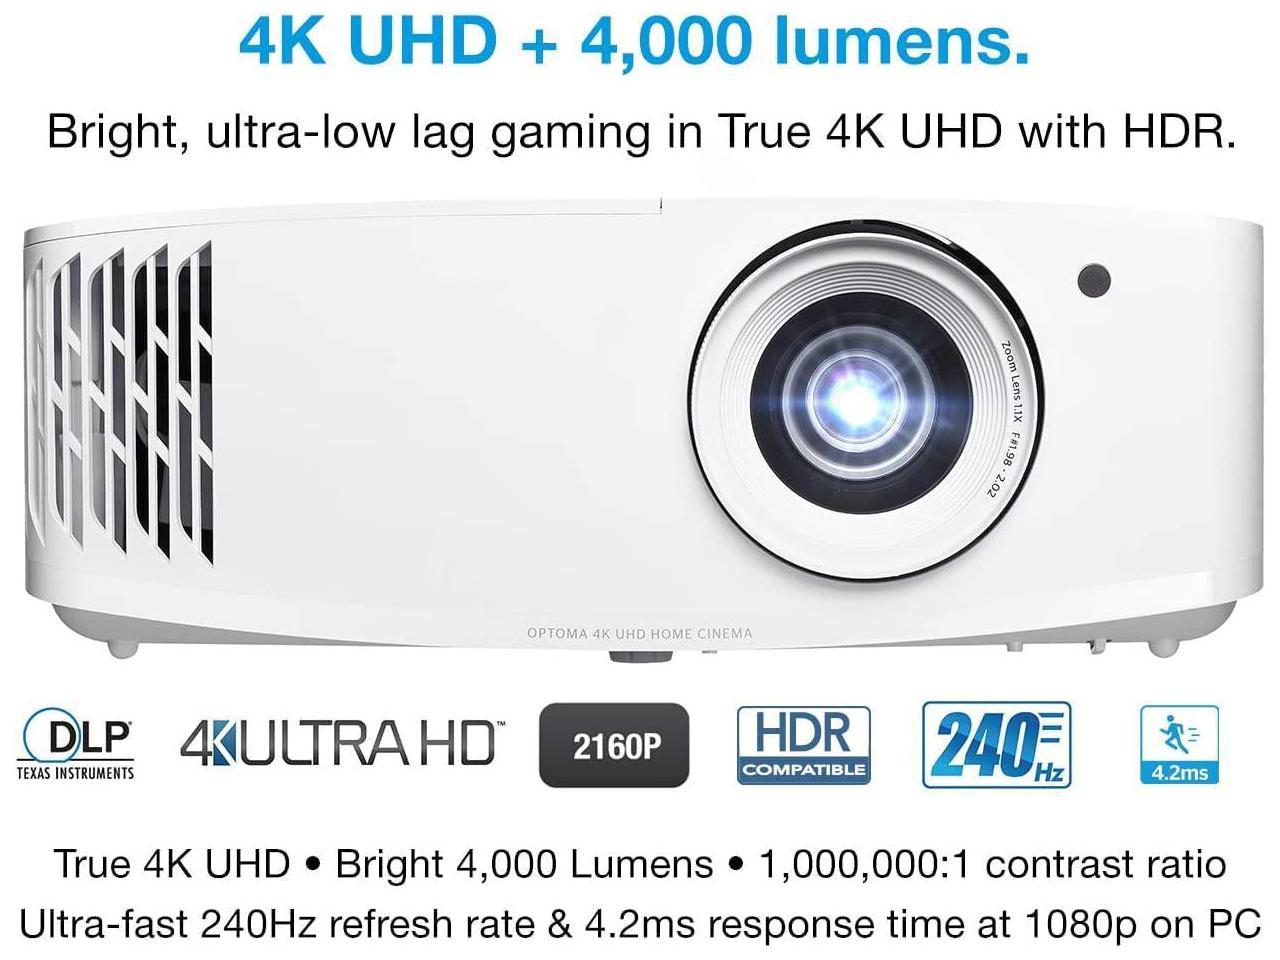 Optoma UHD38x Bright, True 4K UHD Gaming Projector | 4000 Lumens | 4.2ms Response Time at 1080p with Enhanced Gaming Mode | Lowest Input Lag on 4K Projector | 240Hz Refresh Rate | HDR10 & HLG - image 2 of 5